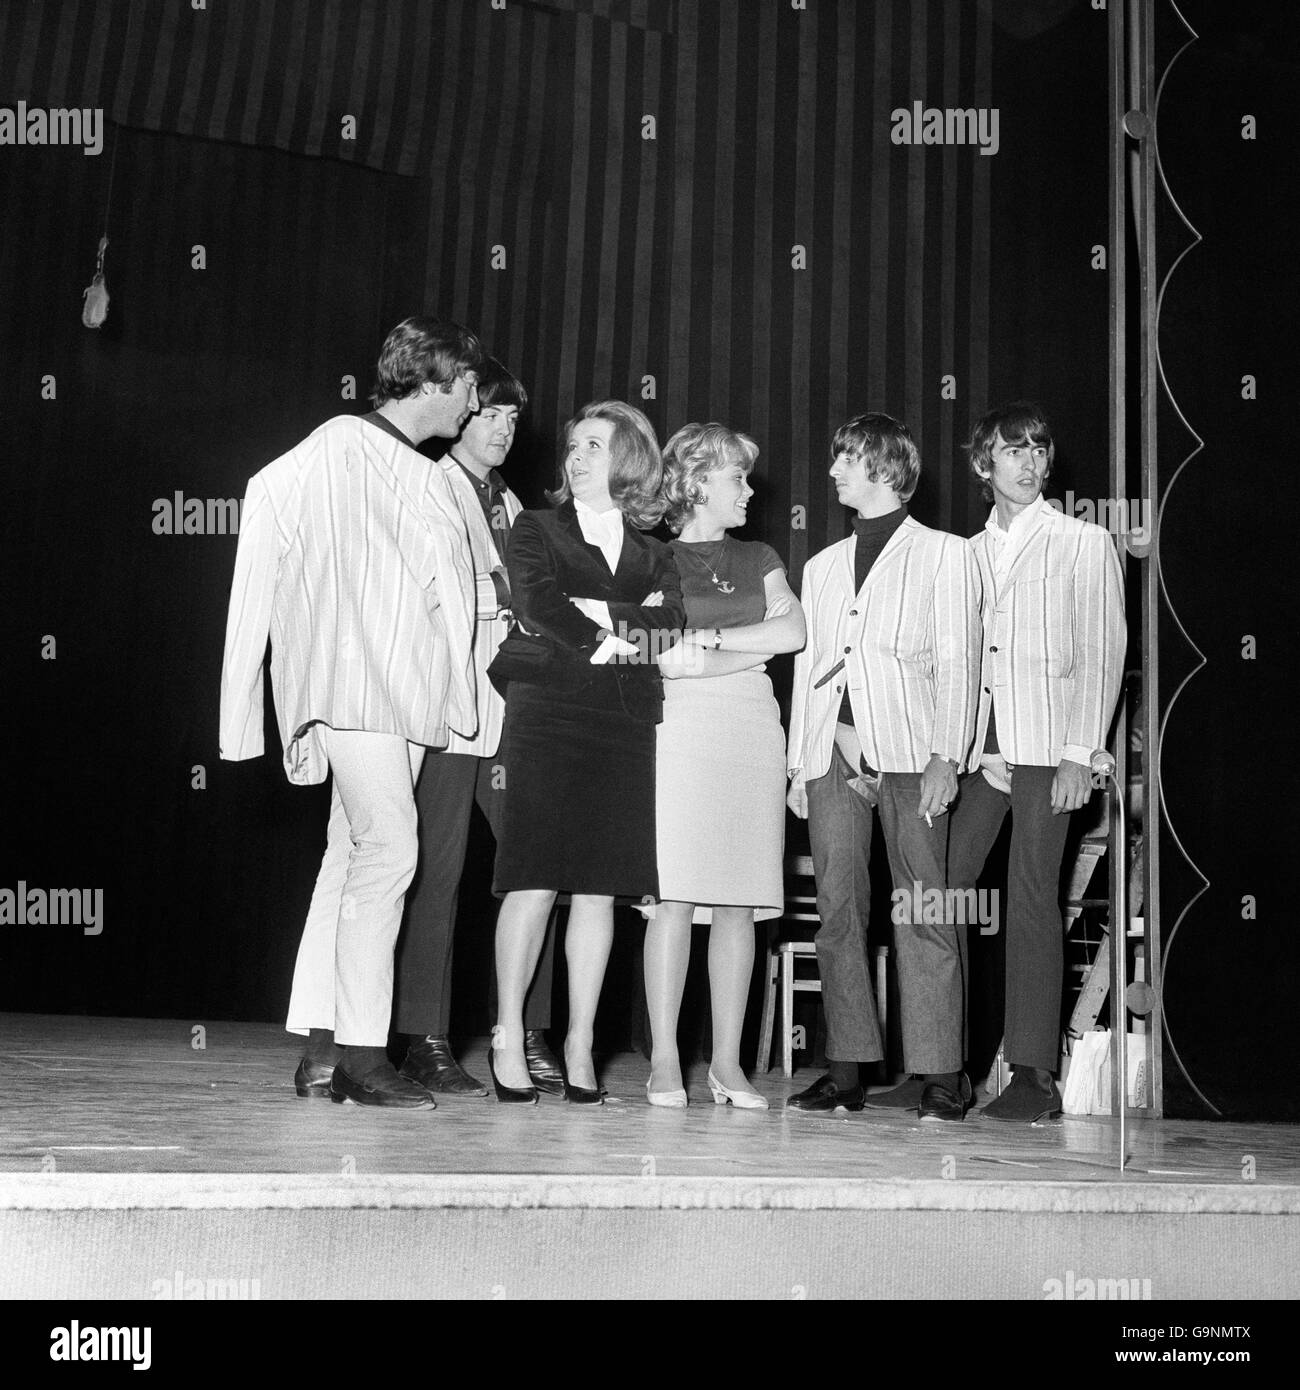 Night of One Hundred Stars are Millicent Martin (left) and Hayley Mills with The Beatles, John Lennon, Paul McCartney, Ringo Starr and George Harrison, at the London Palladium. Stock Photo